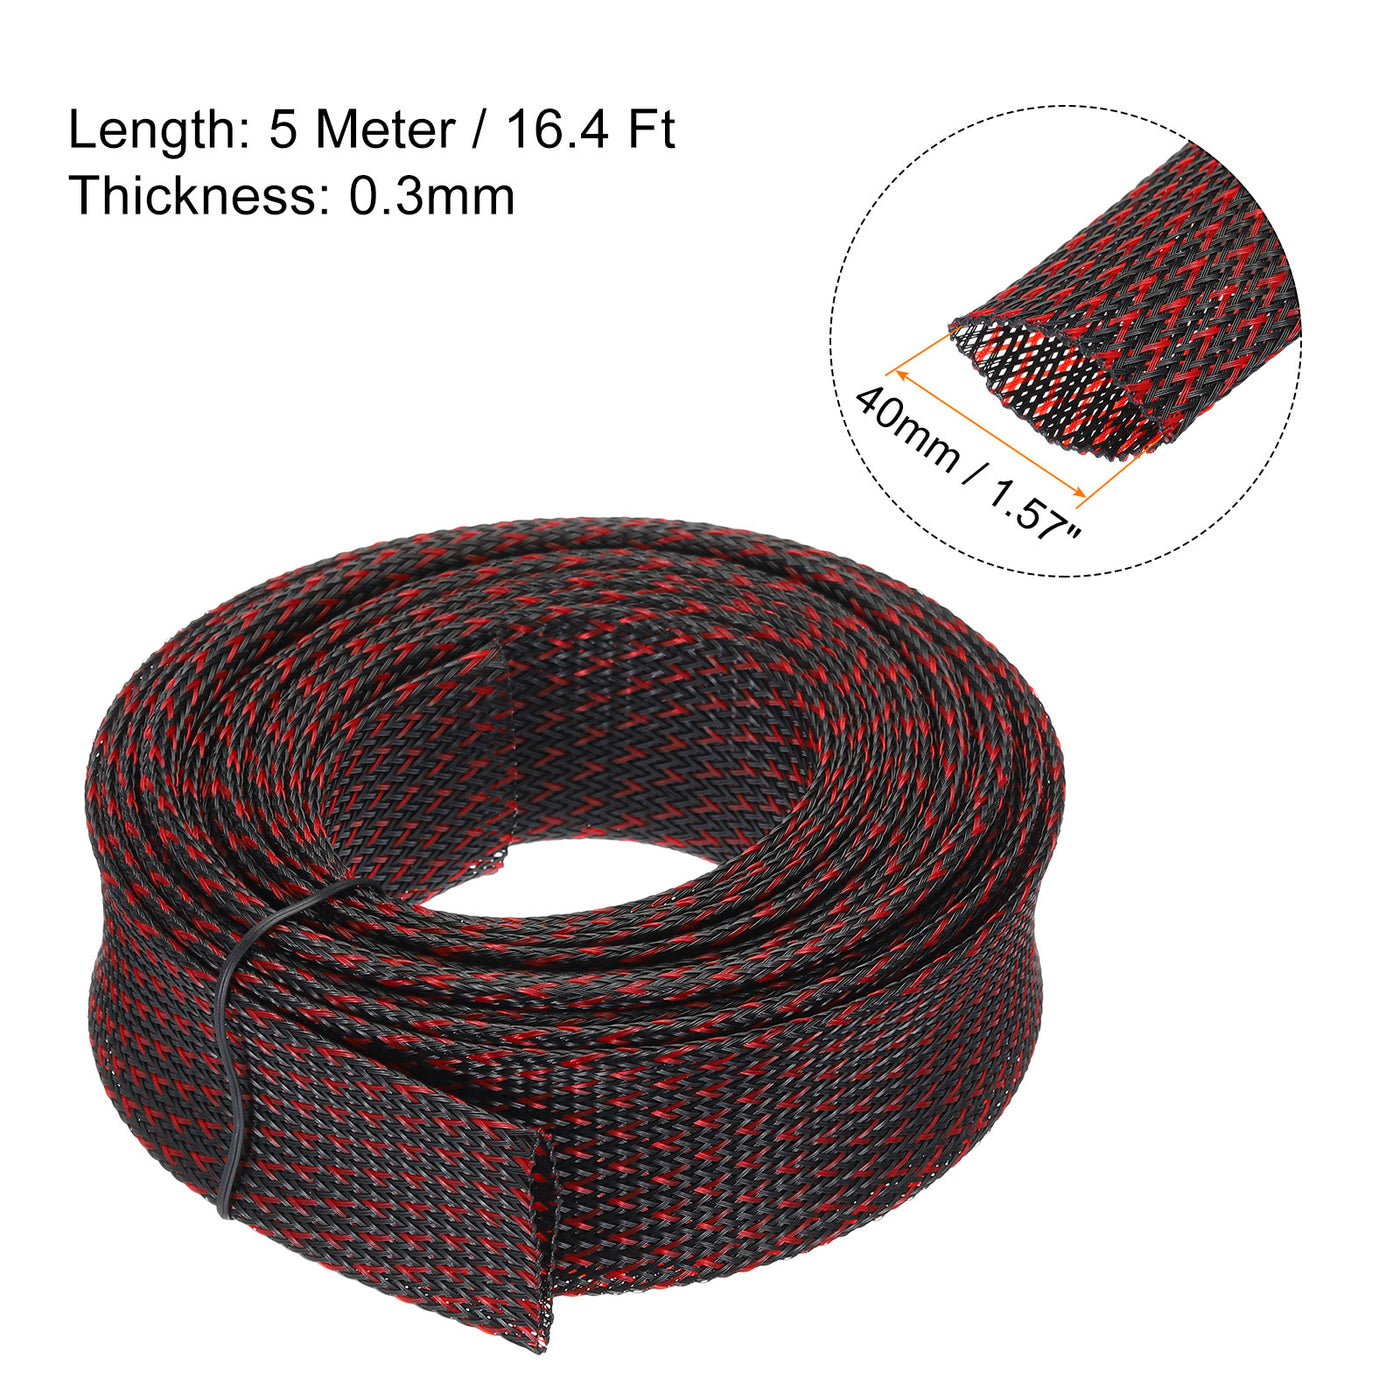 uxcell Uxcell Insulation Braid Sleeving, 16.4 Ft-40mm High Temperature Sleeve Black Red